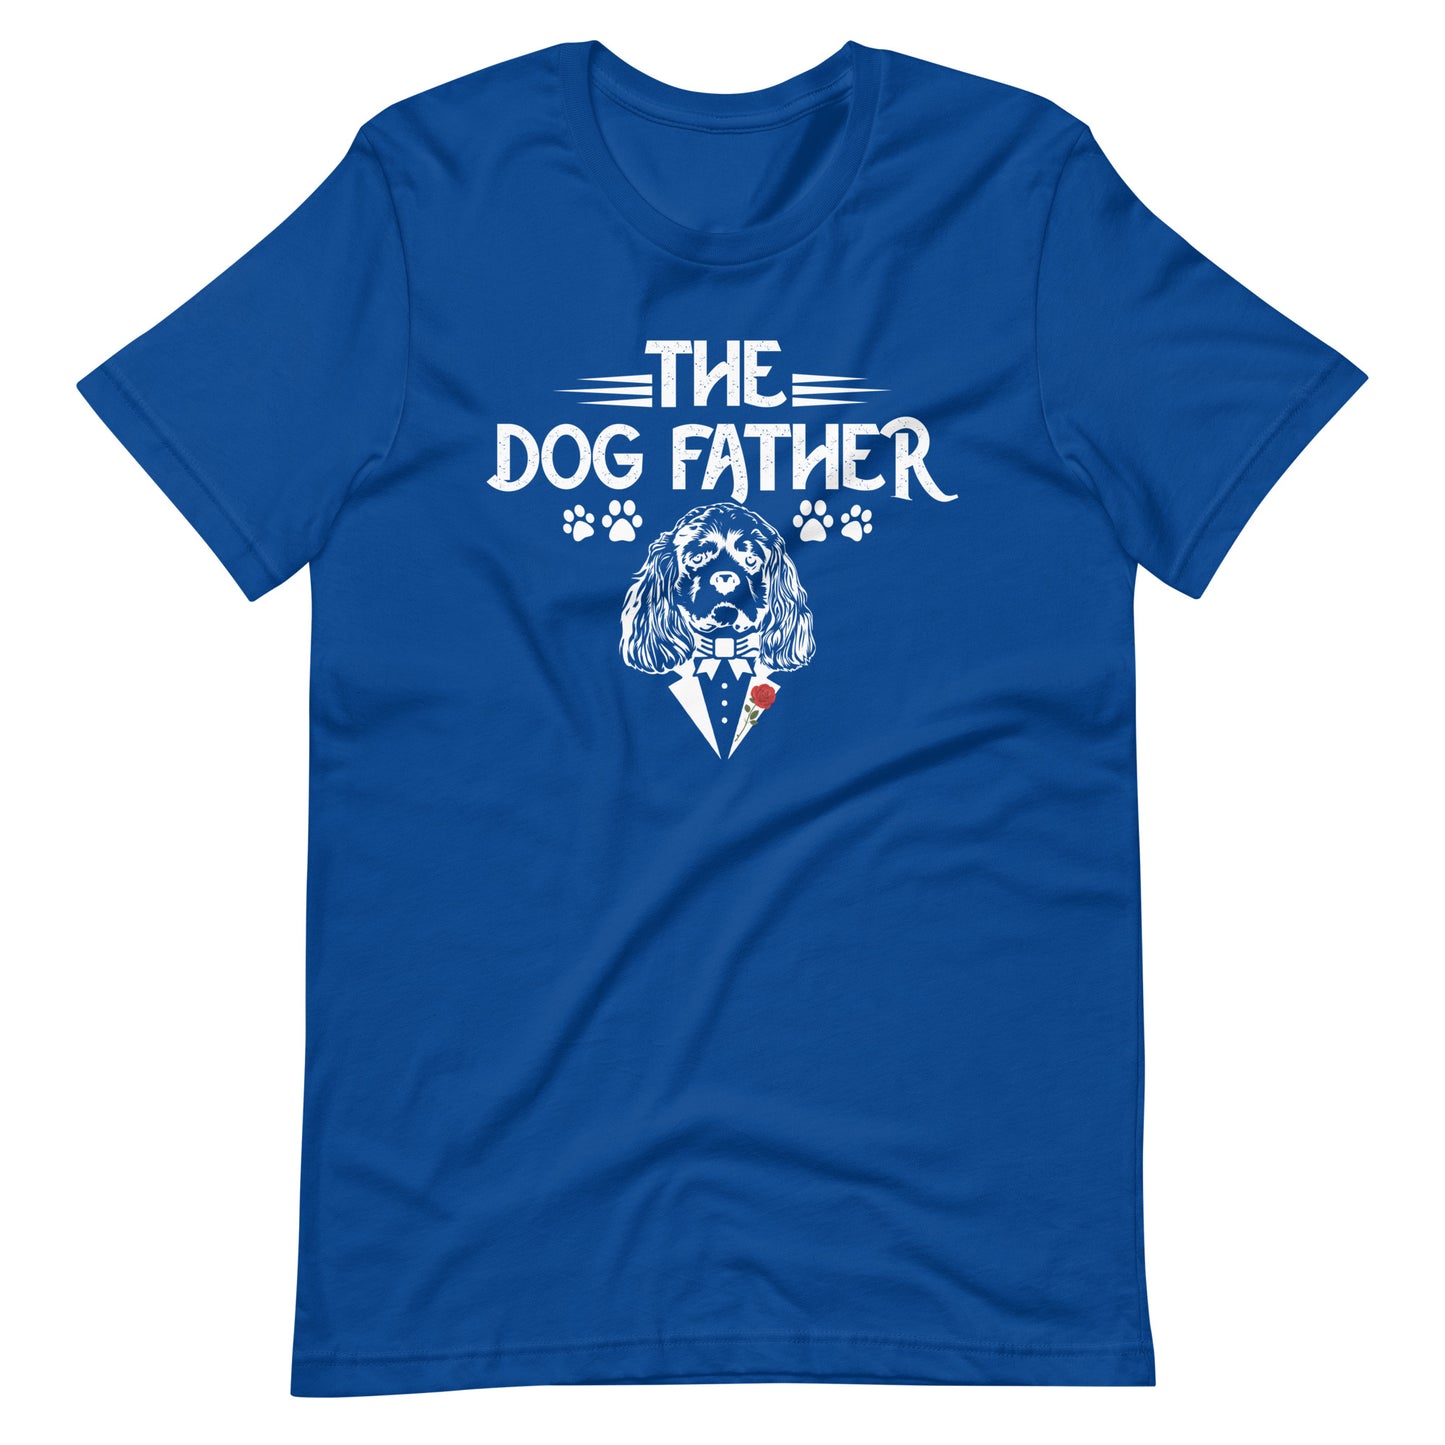 The Dog Father T-Shirt for Dog Dads